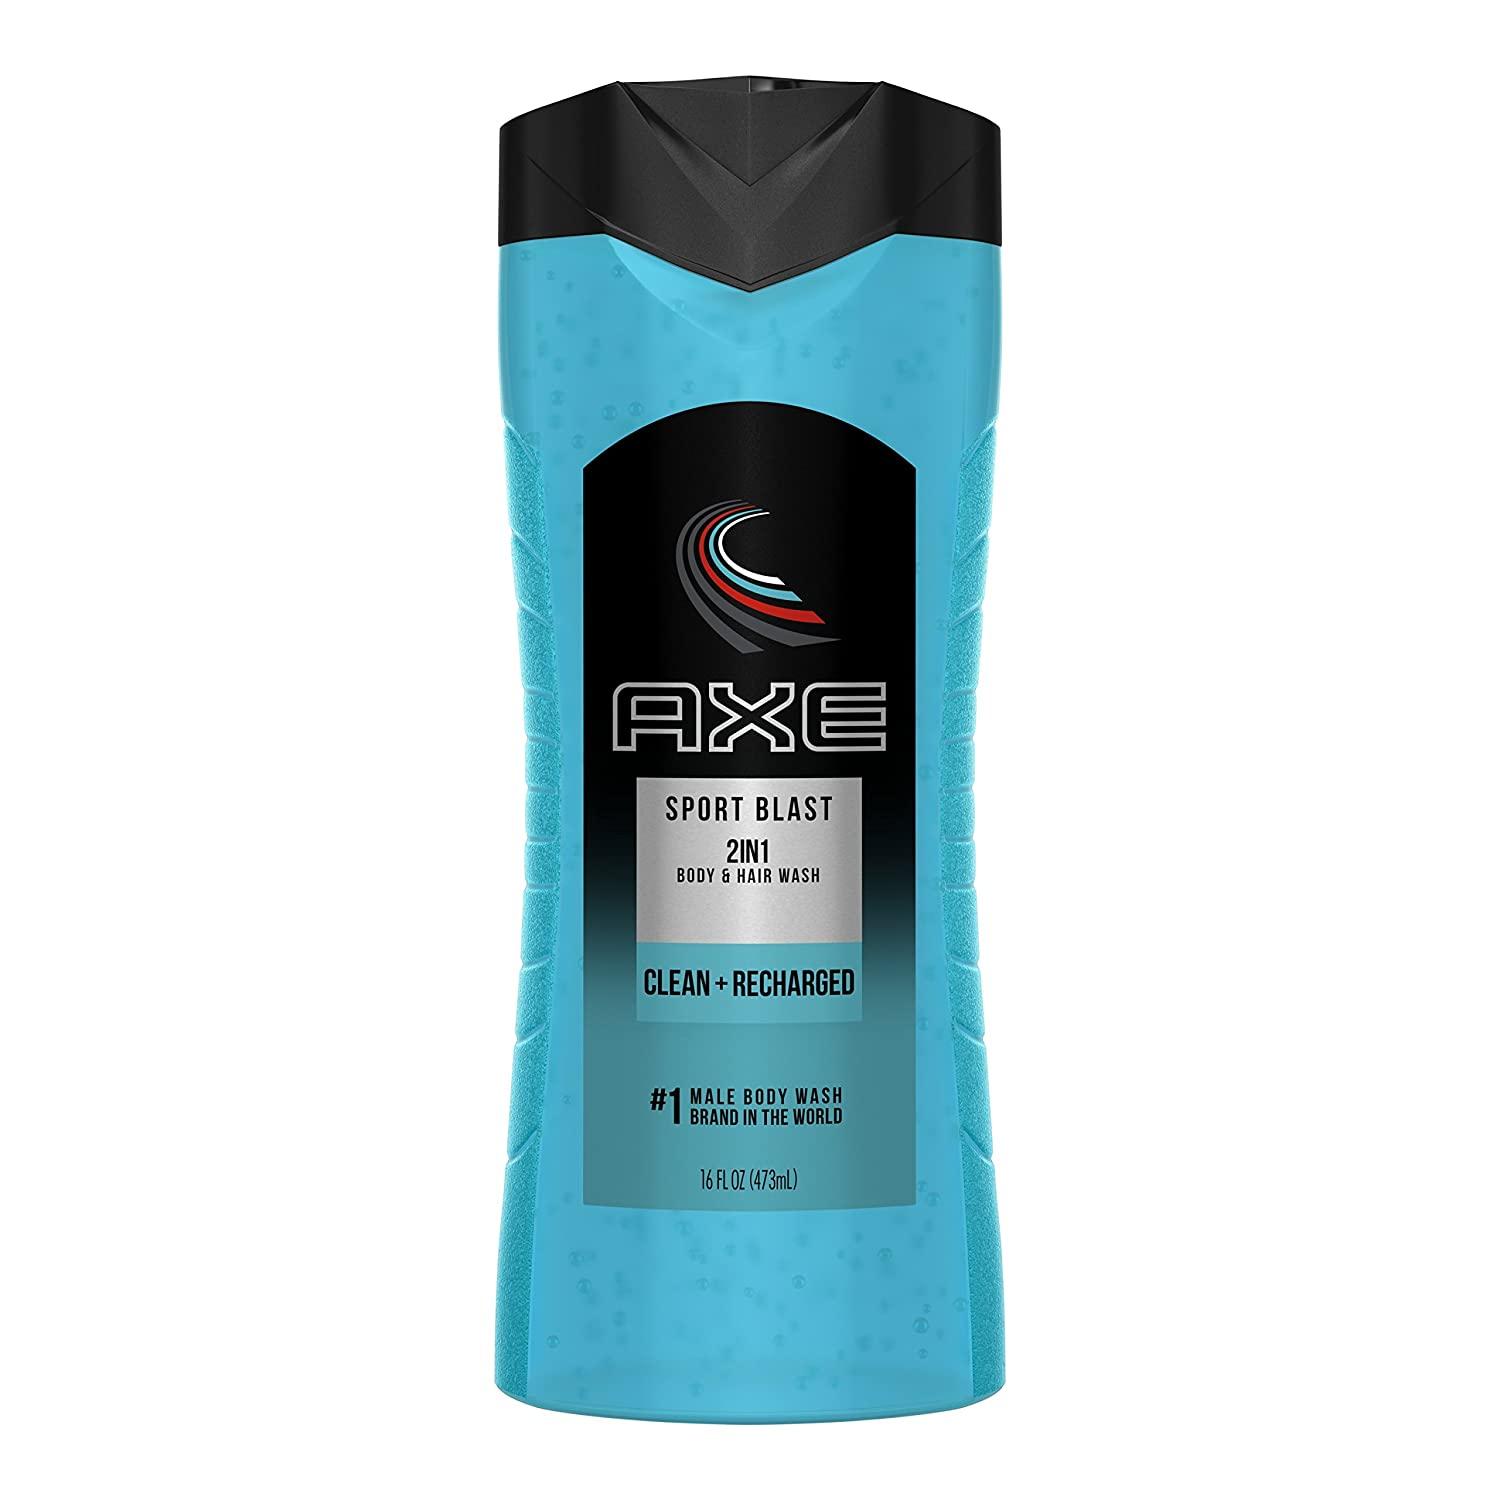 Axe Sport Blast 2-in-1 Body Wash and Shampoo for $2.16 Shipped